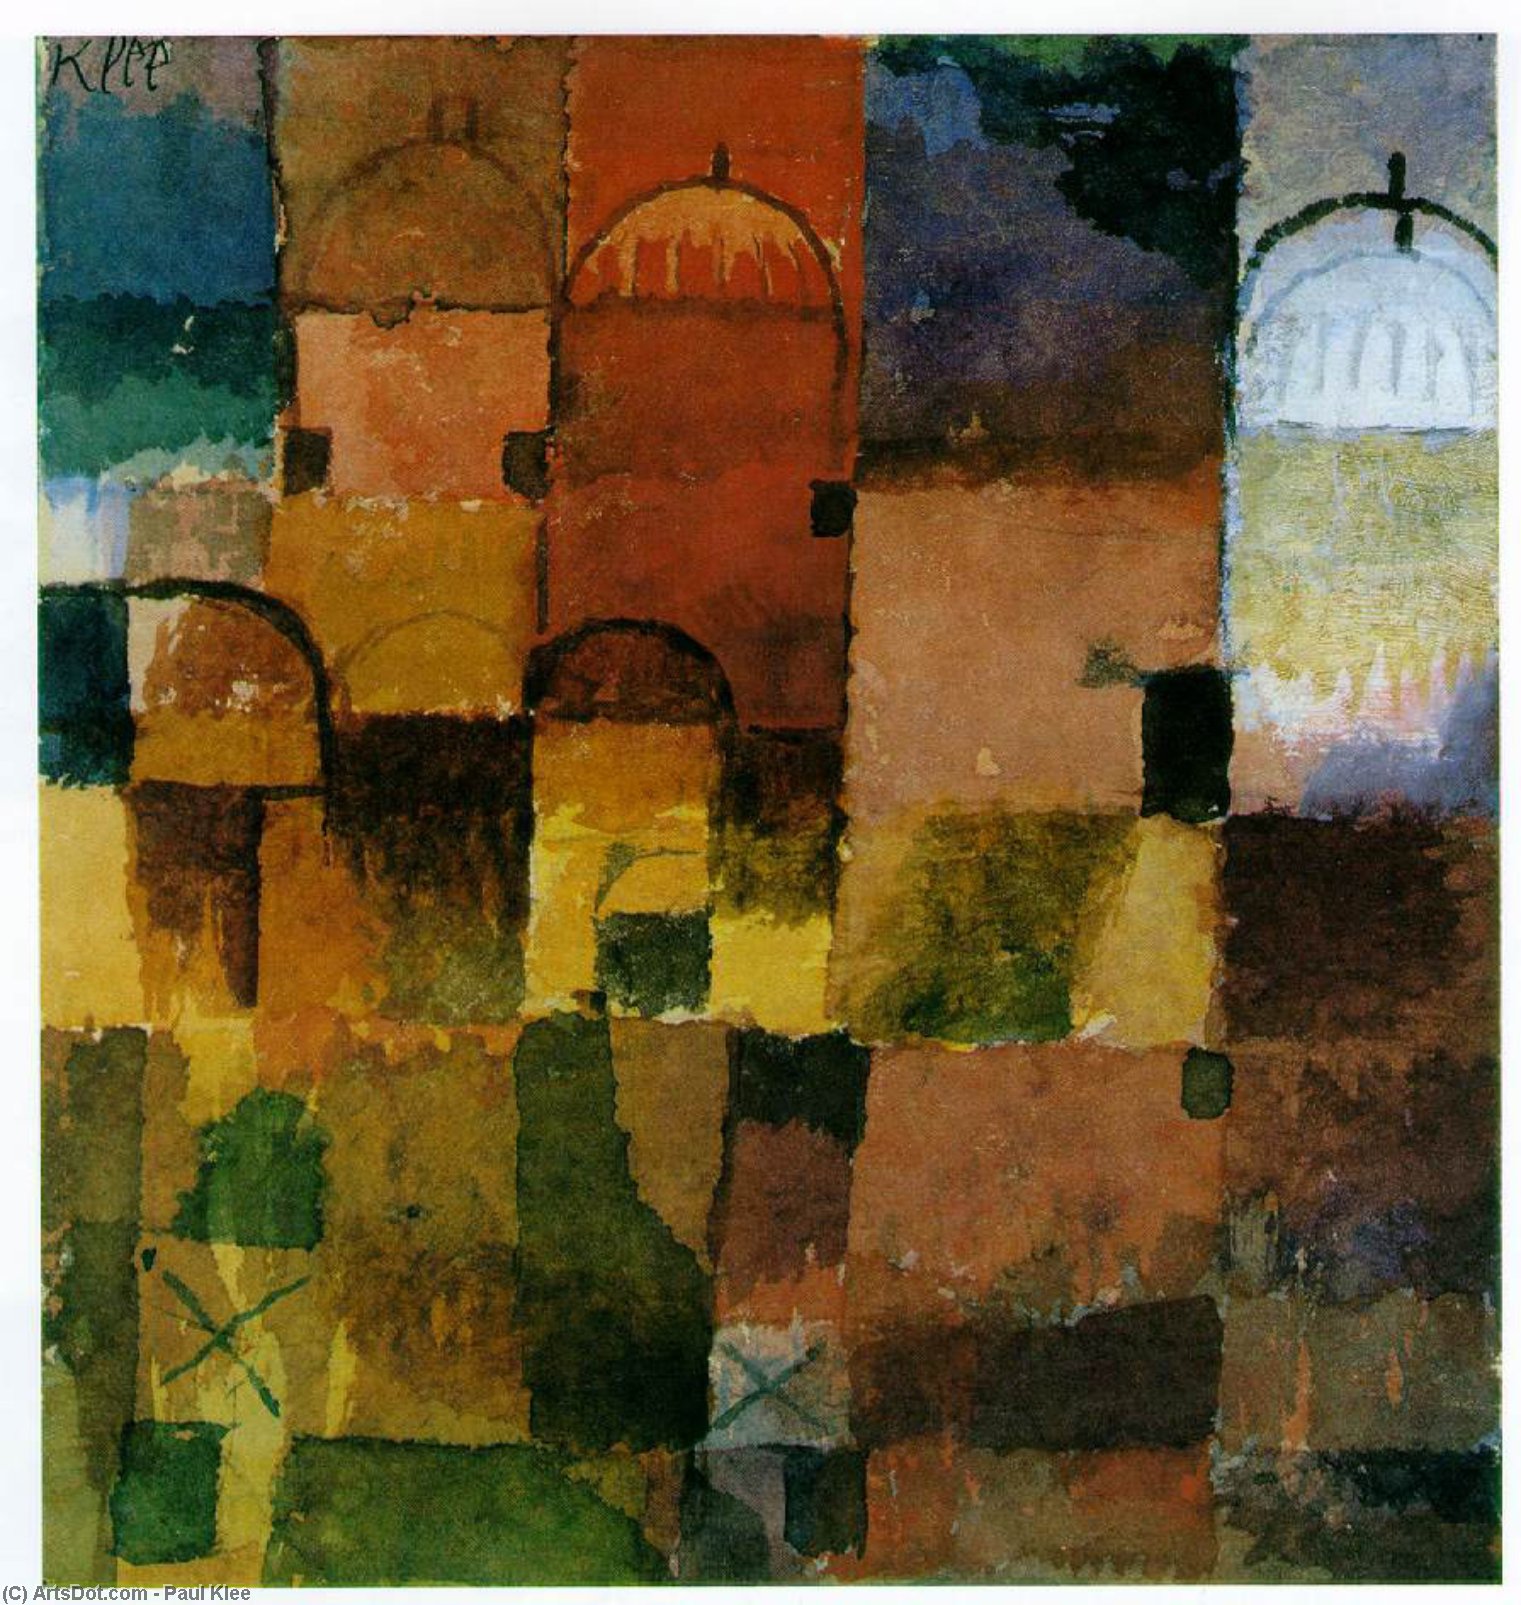 WikiOO.org - 백과 사전 - 회화, 삽화 Paul Klee - Red and White Domes